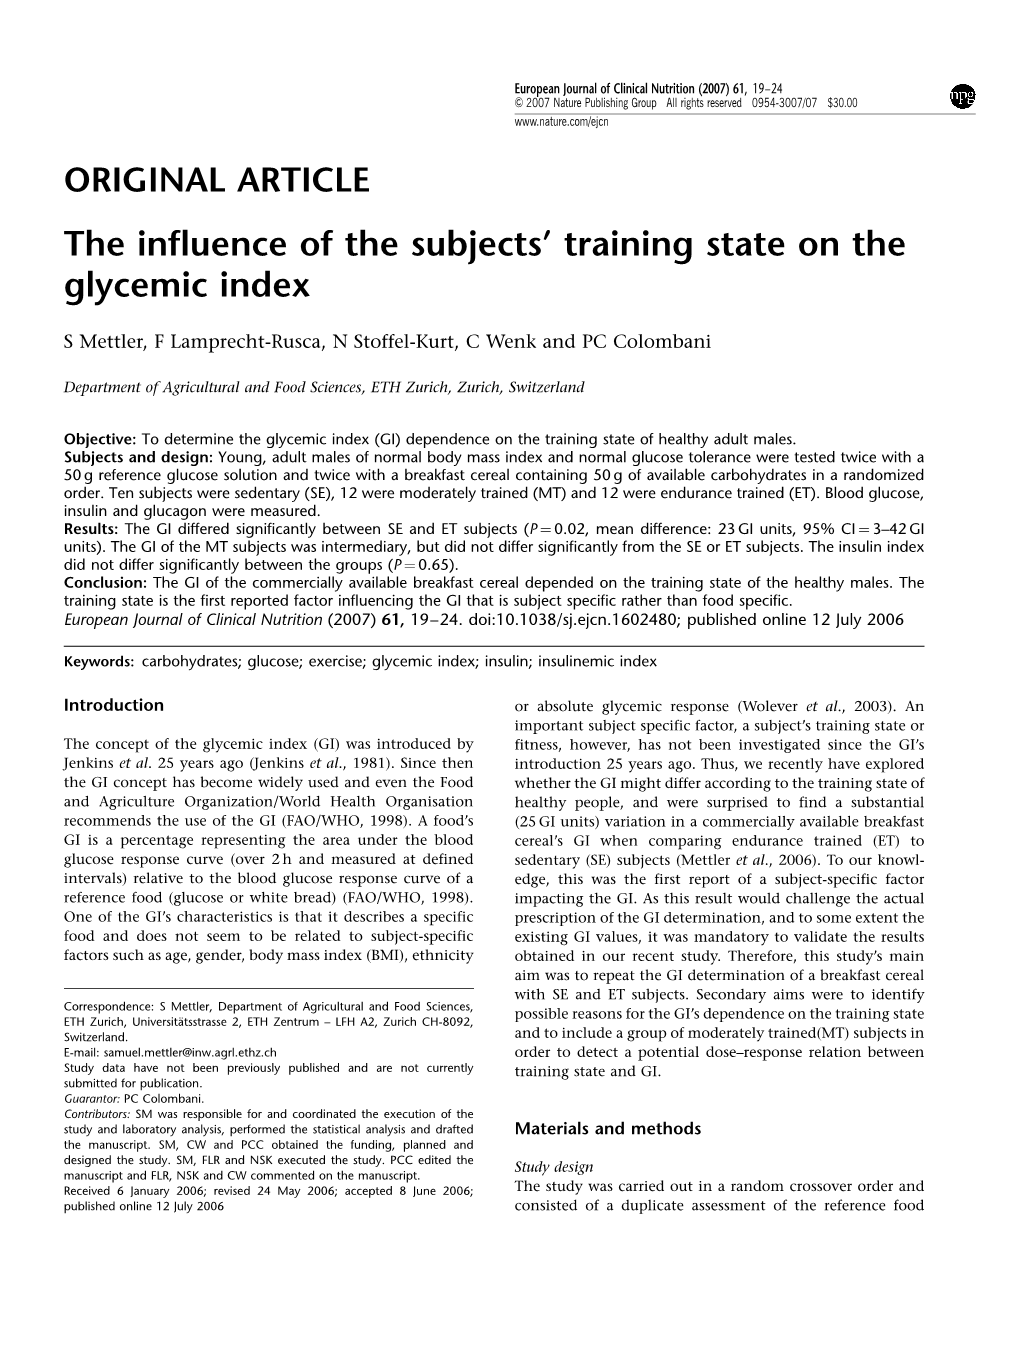 The Influence of the Subjects' Training State on the Glycemic Index